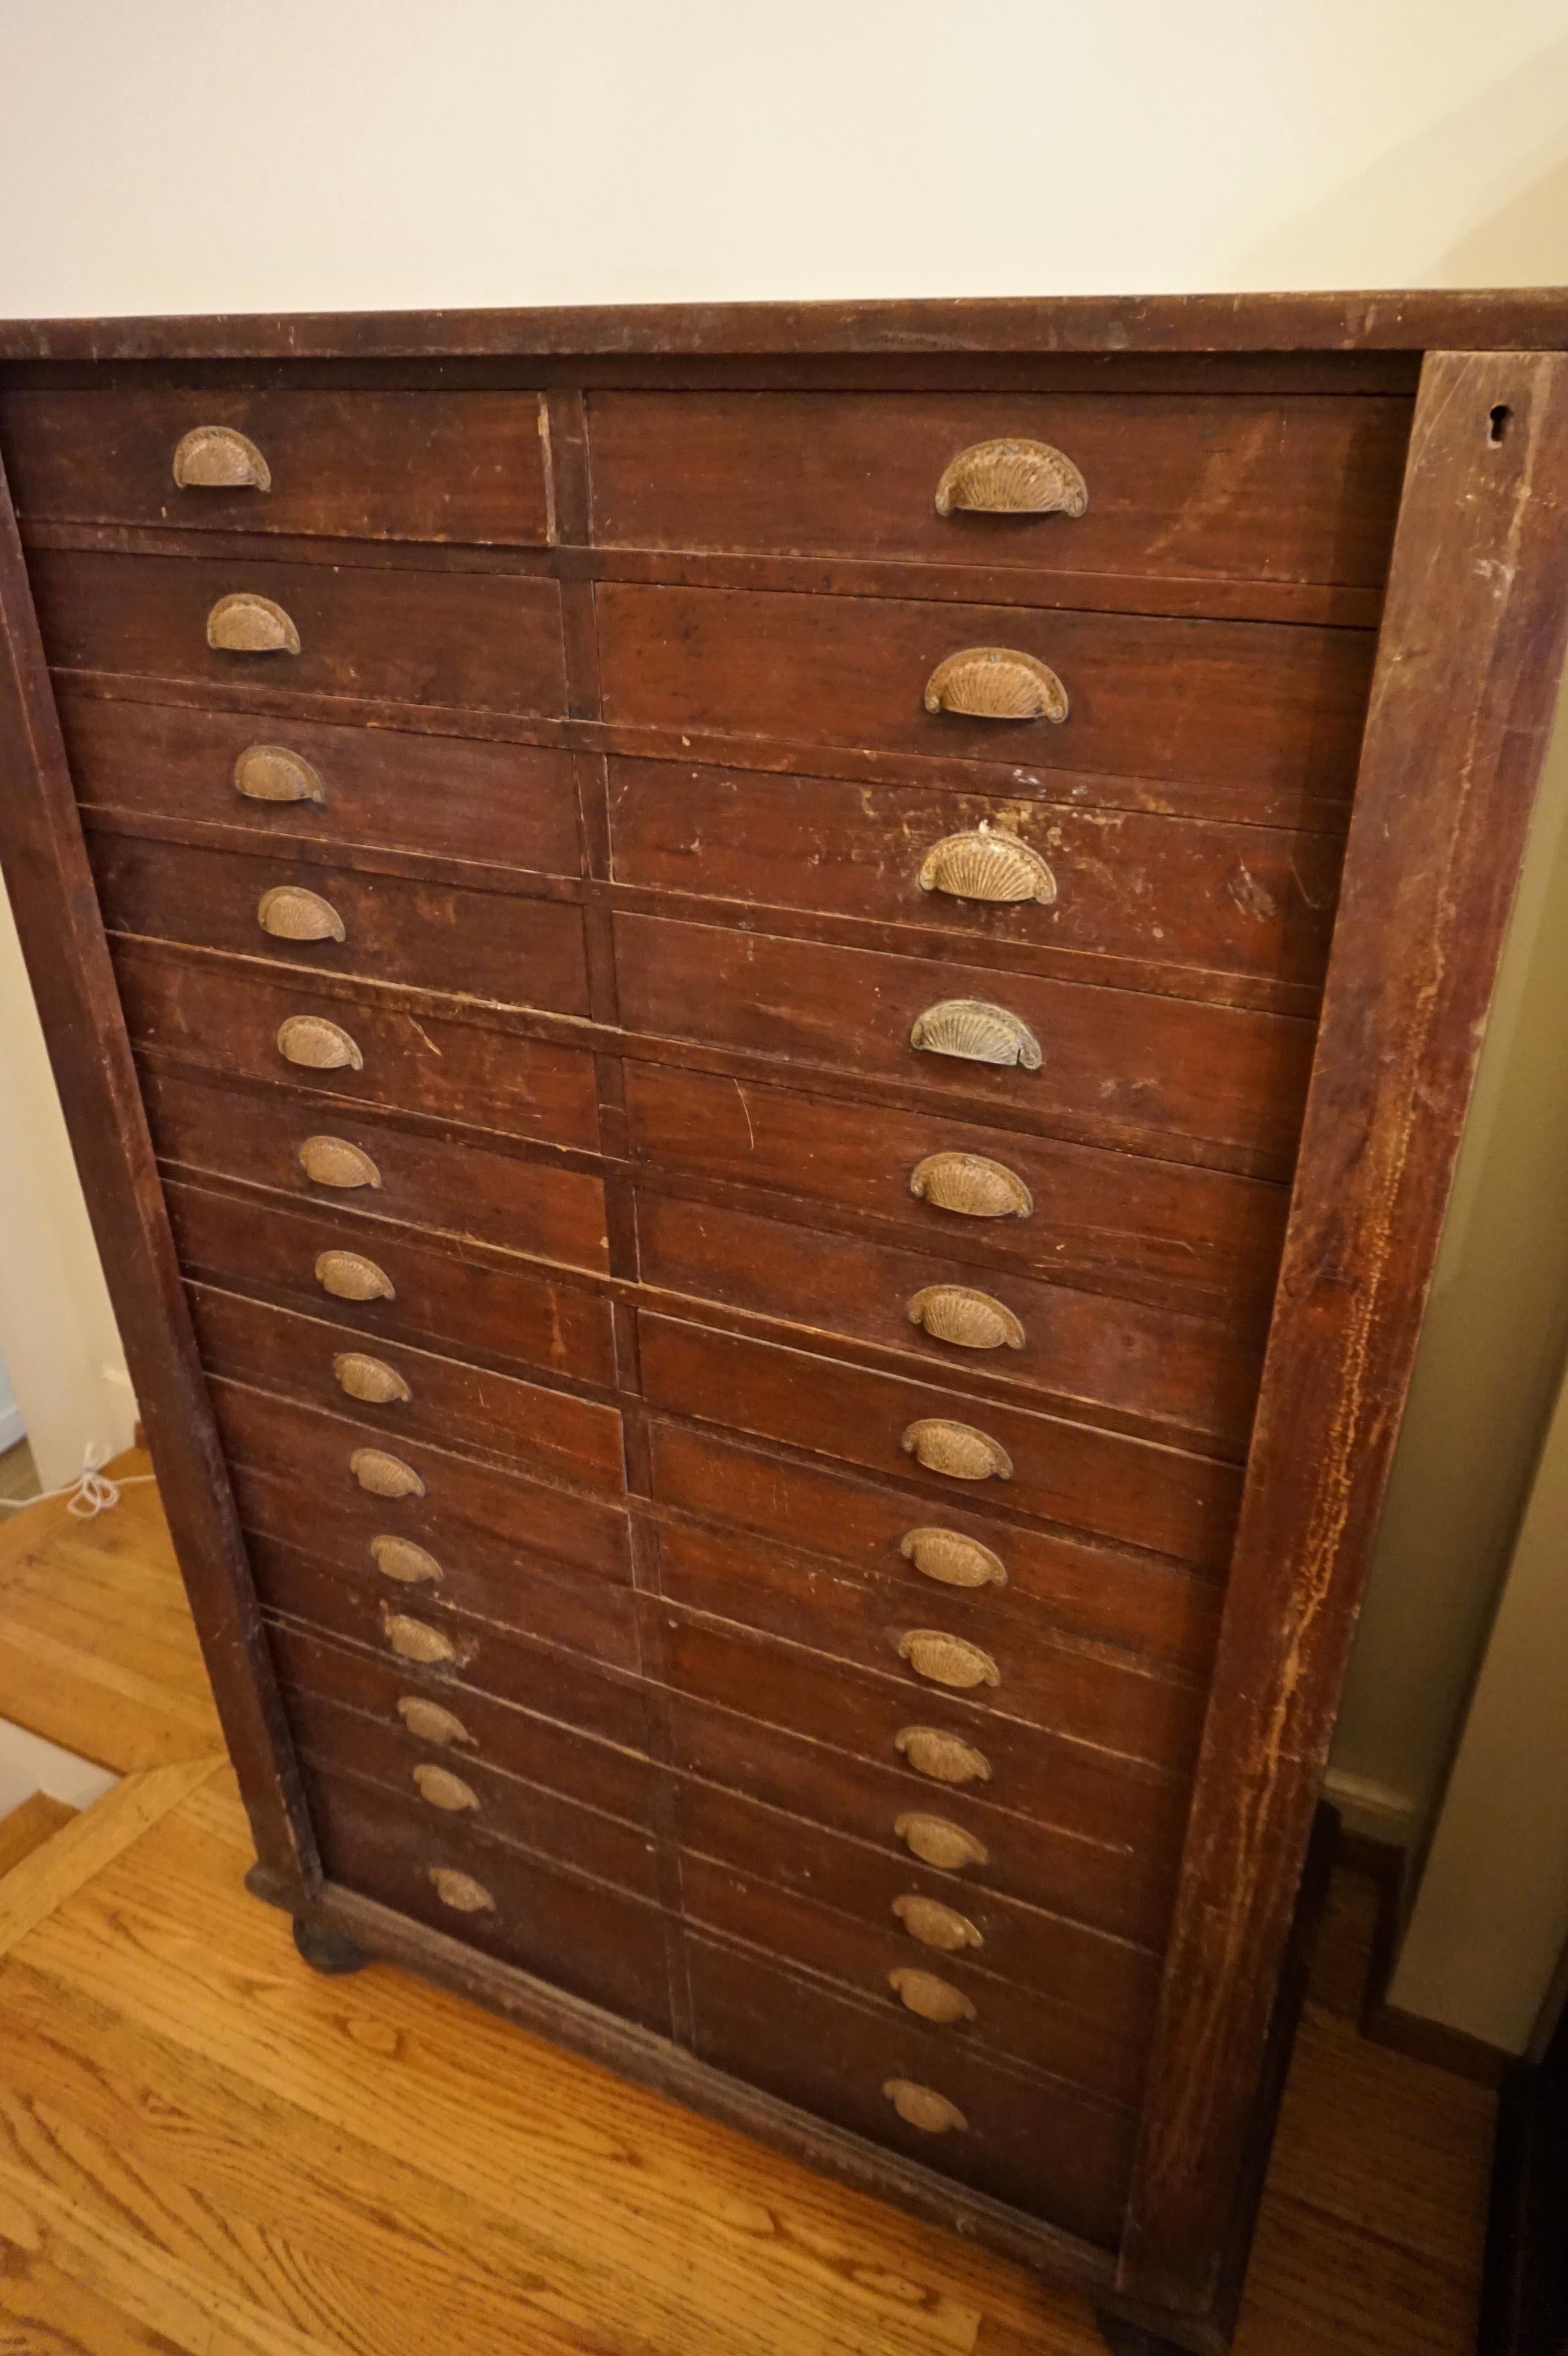 British Colonial Teak Filing Apothecary Cabinet wt Metal Pulls & Lock Mechanism In Good Condition For Sale In Vancouver, British Columbia